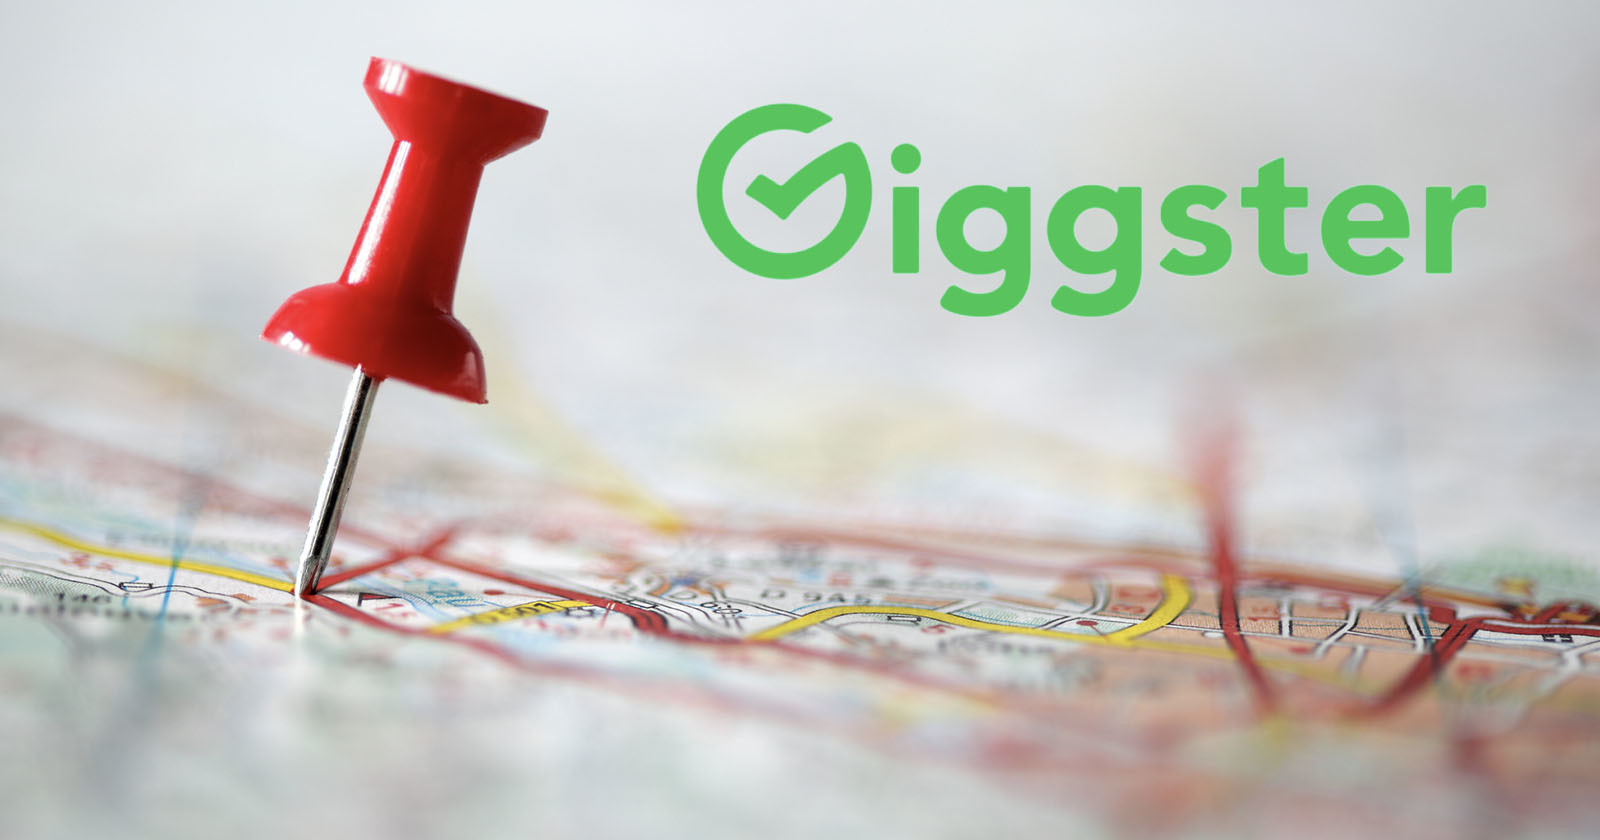  giggster helps photographers filmmakers find locations 